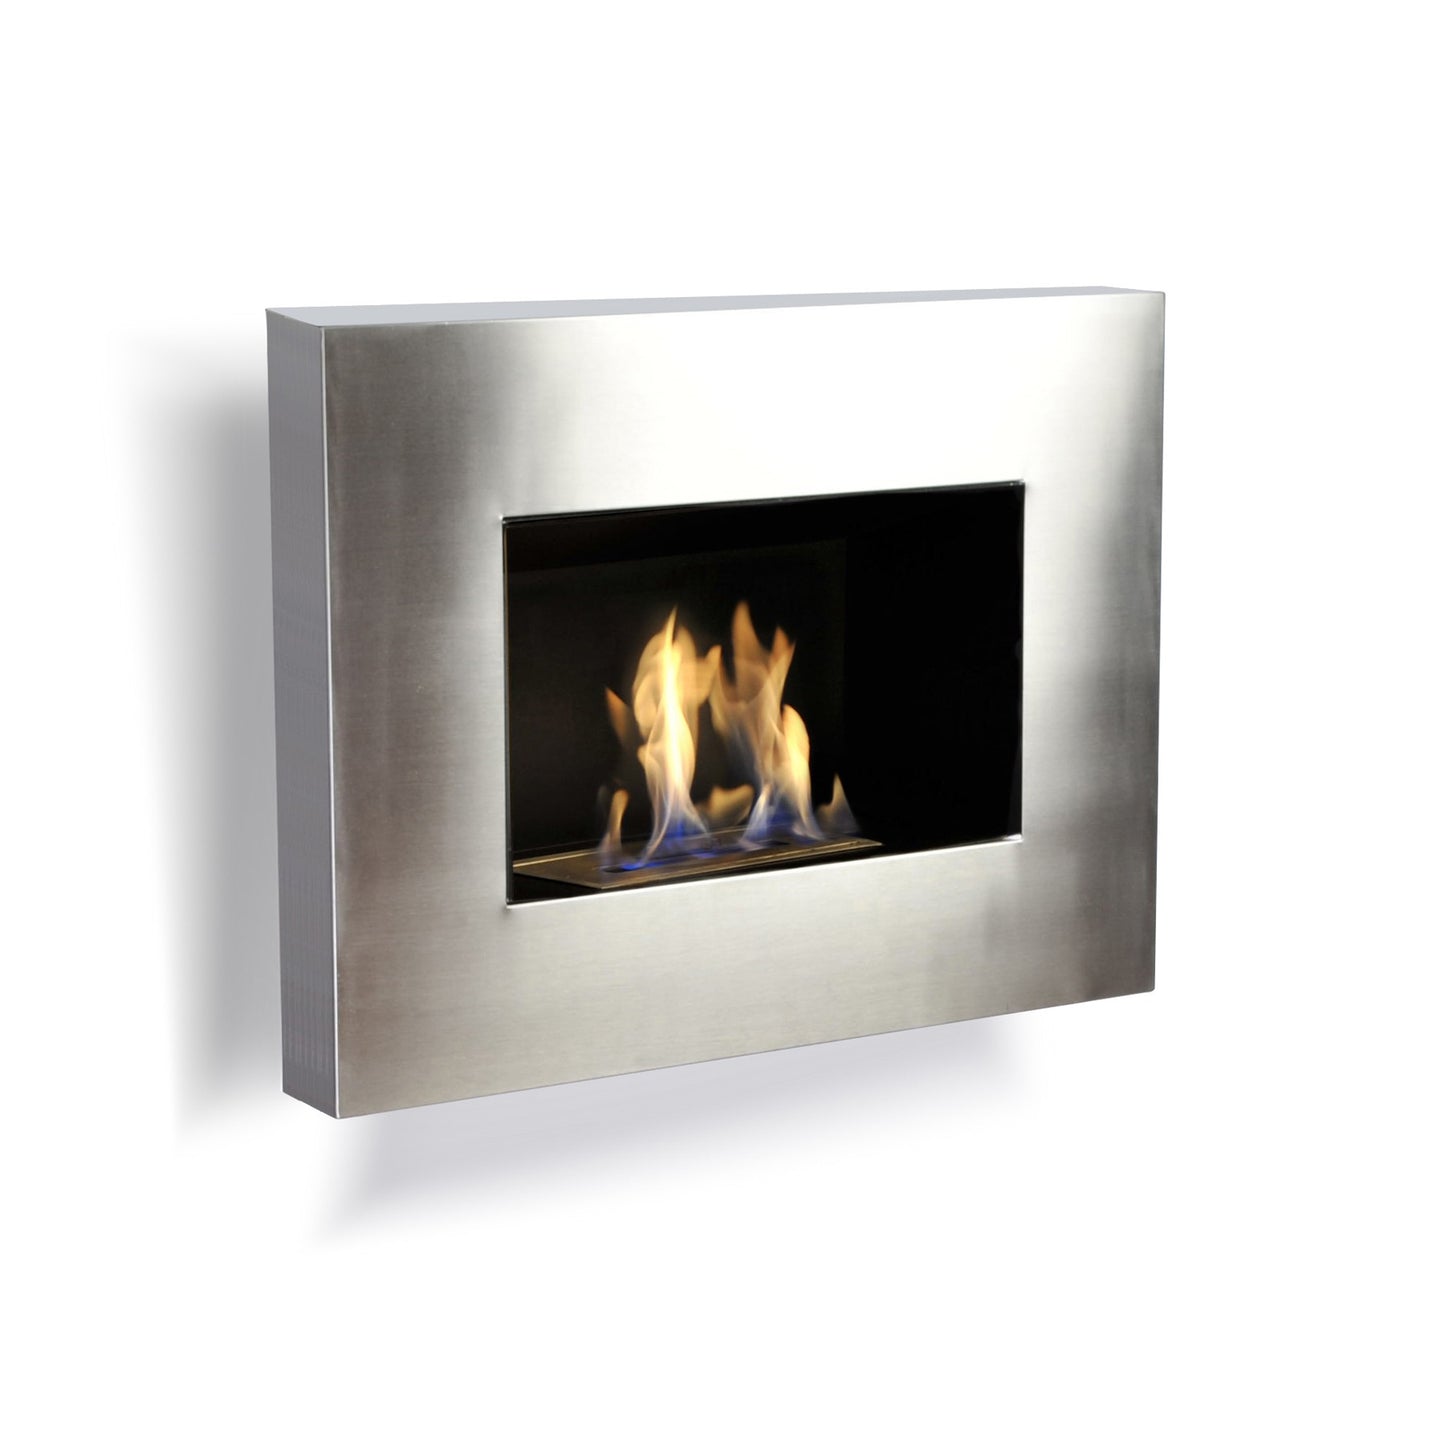 STERLING Bioethanol Fireplace on white wall